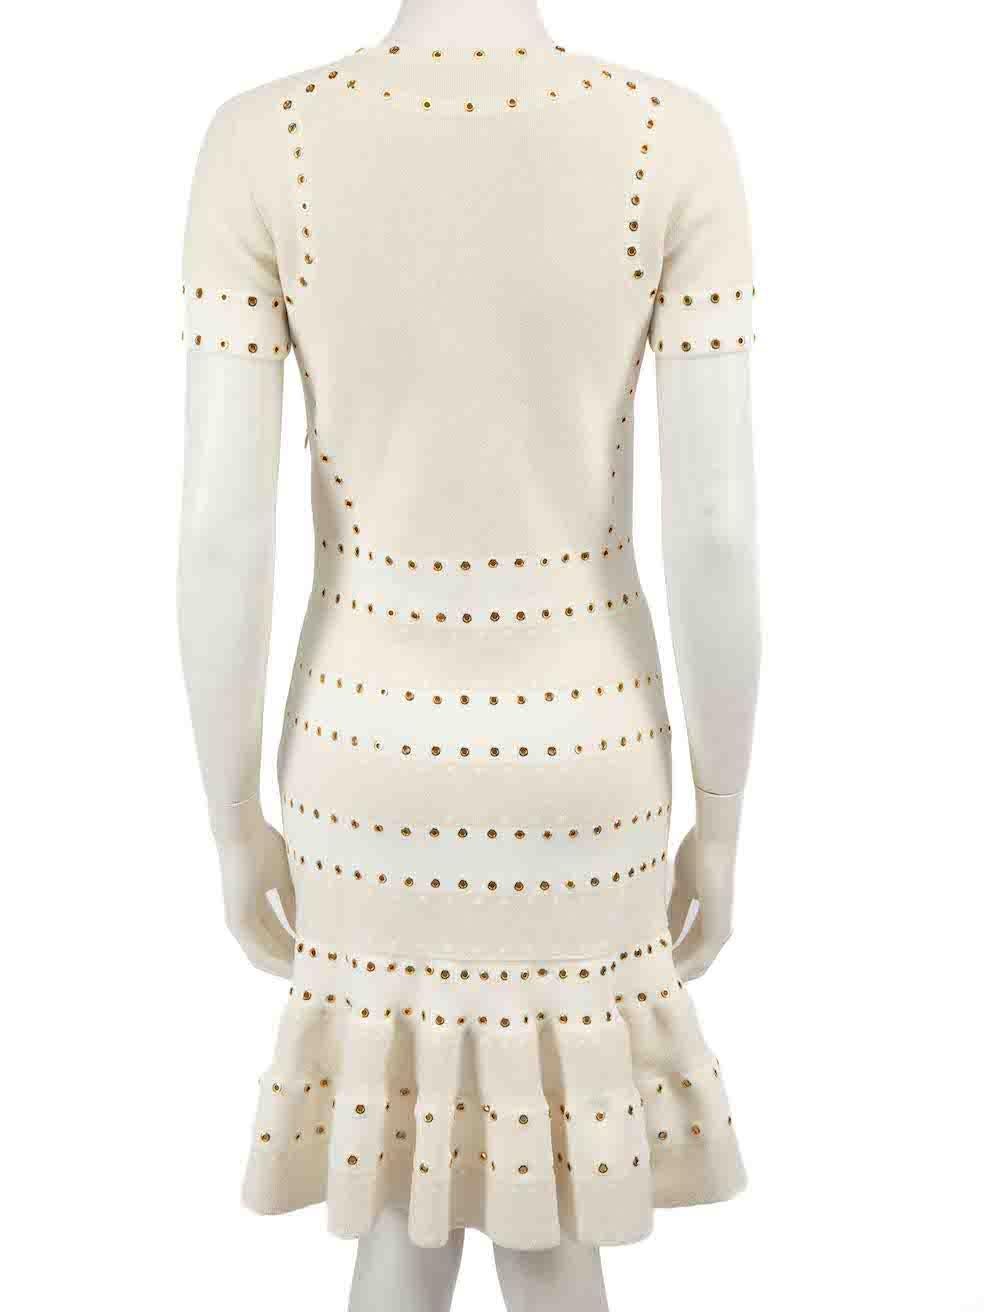 Alexander McQueen Ecru Eyelet Detail Knit Dress Size M In Good Condition For Sale In London, GB